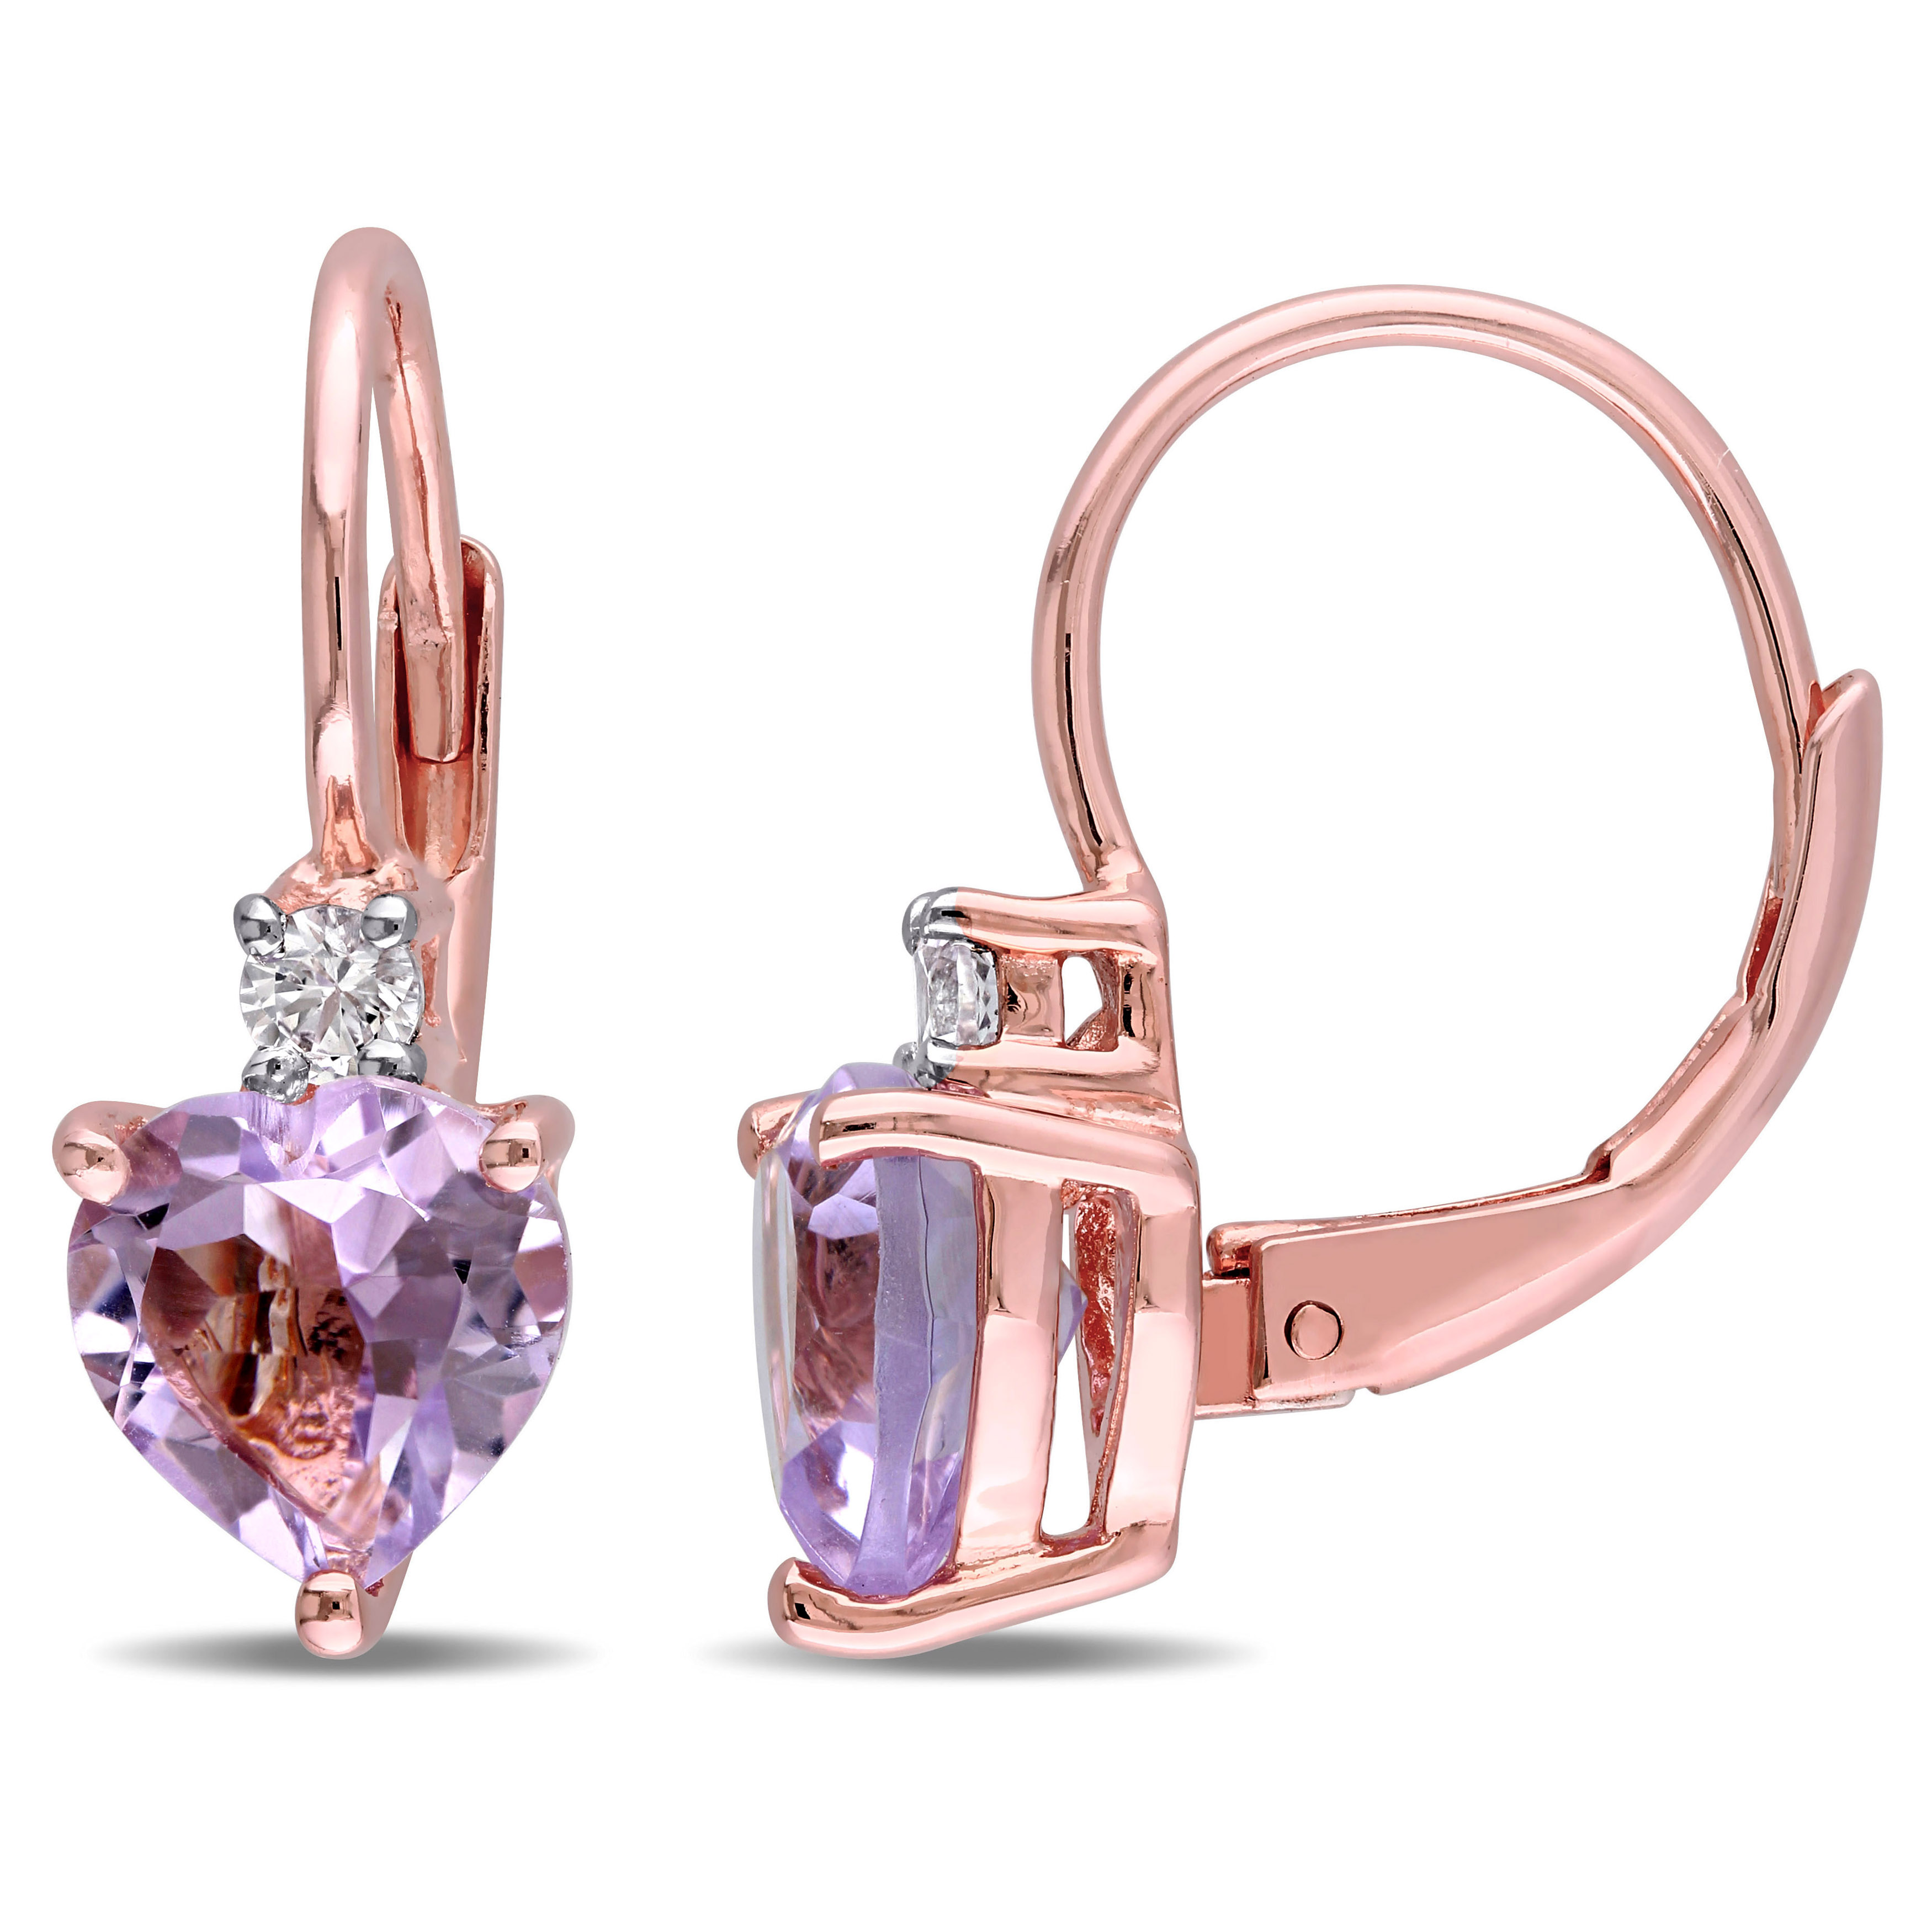 2 1/10 CT TGW Heart Shaped Rose de France and Created White Sapphire Leverback Earrings in Rose Plated Sterling Silver